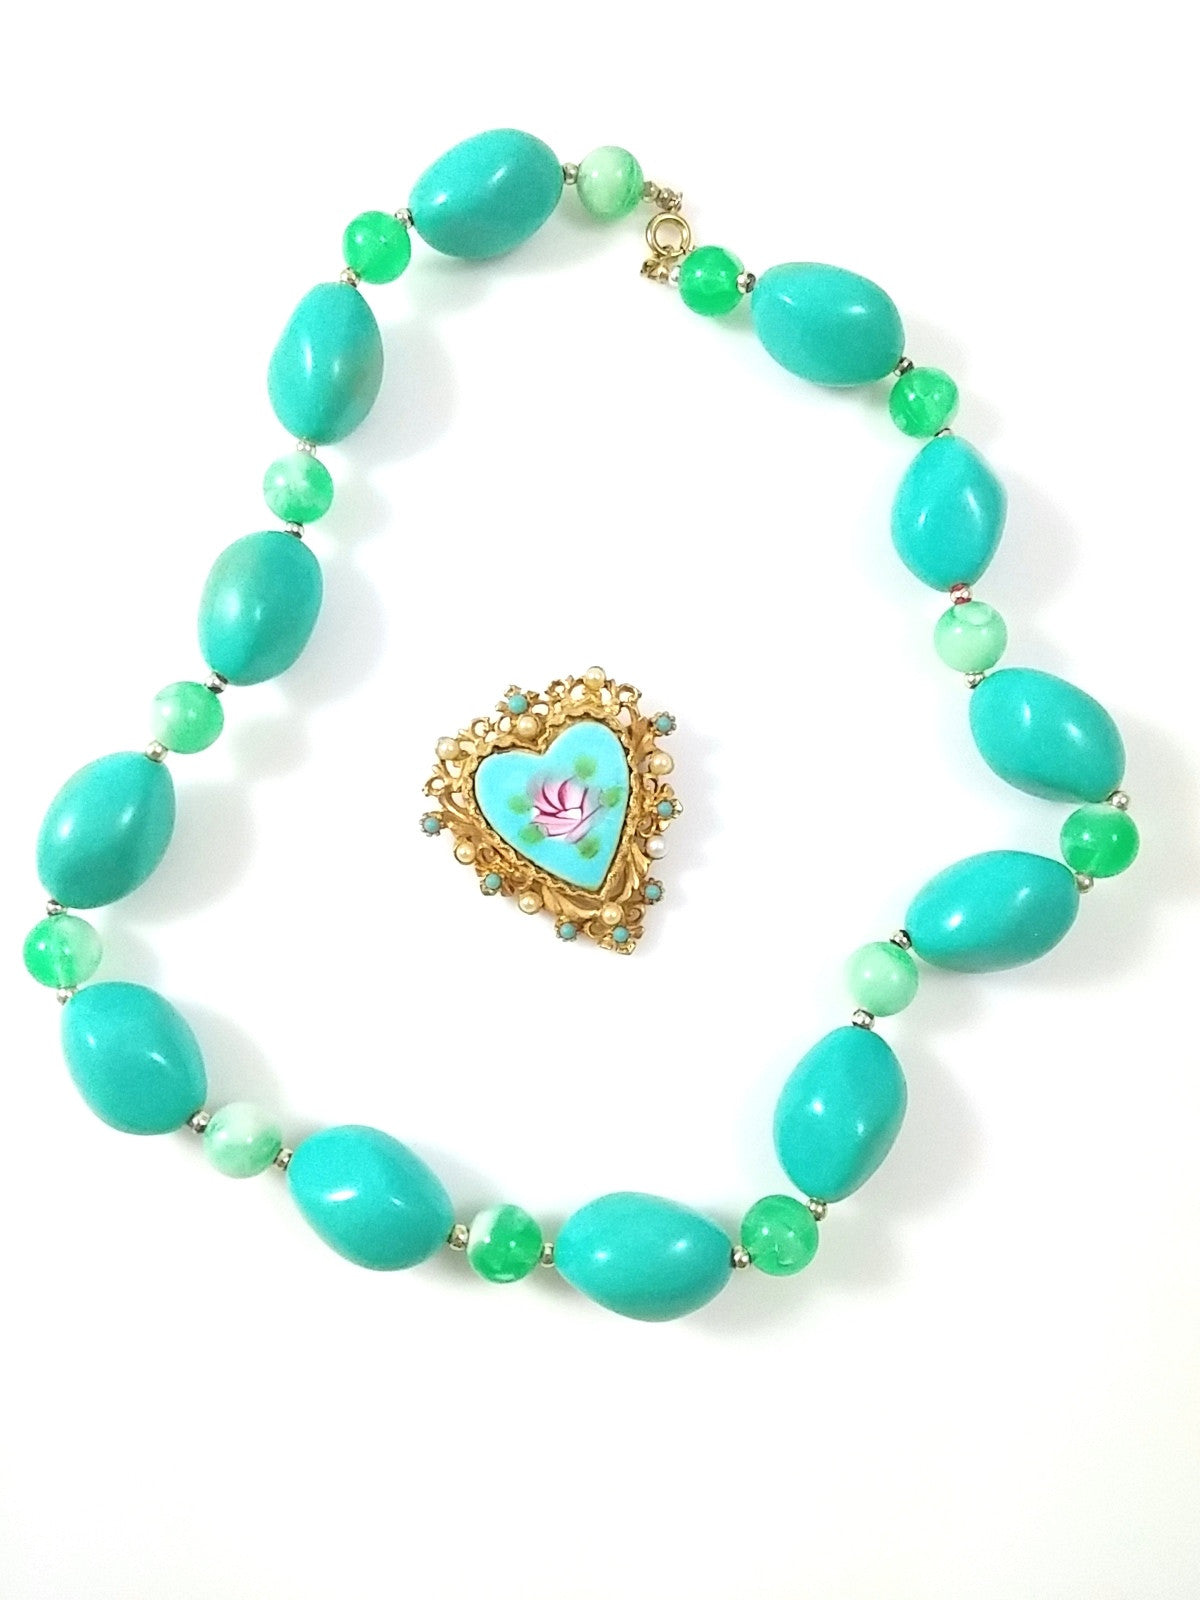 Vintage Turquoise Beaded Necklace & Heart Brooch by ART - Dirty 30 Vintage | Vintage Clothing, Vintage Jewelry, Vintage Accessories